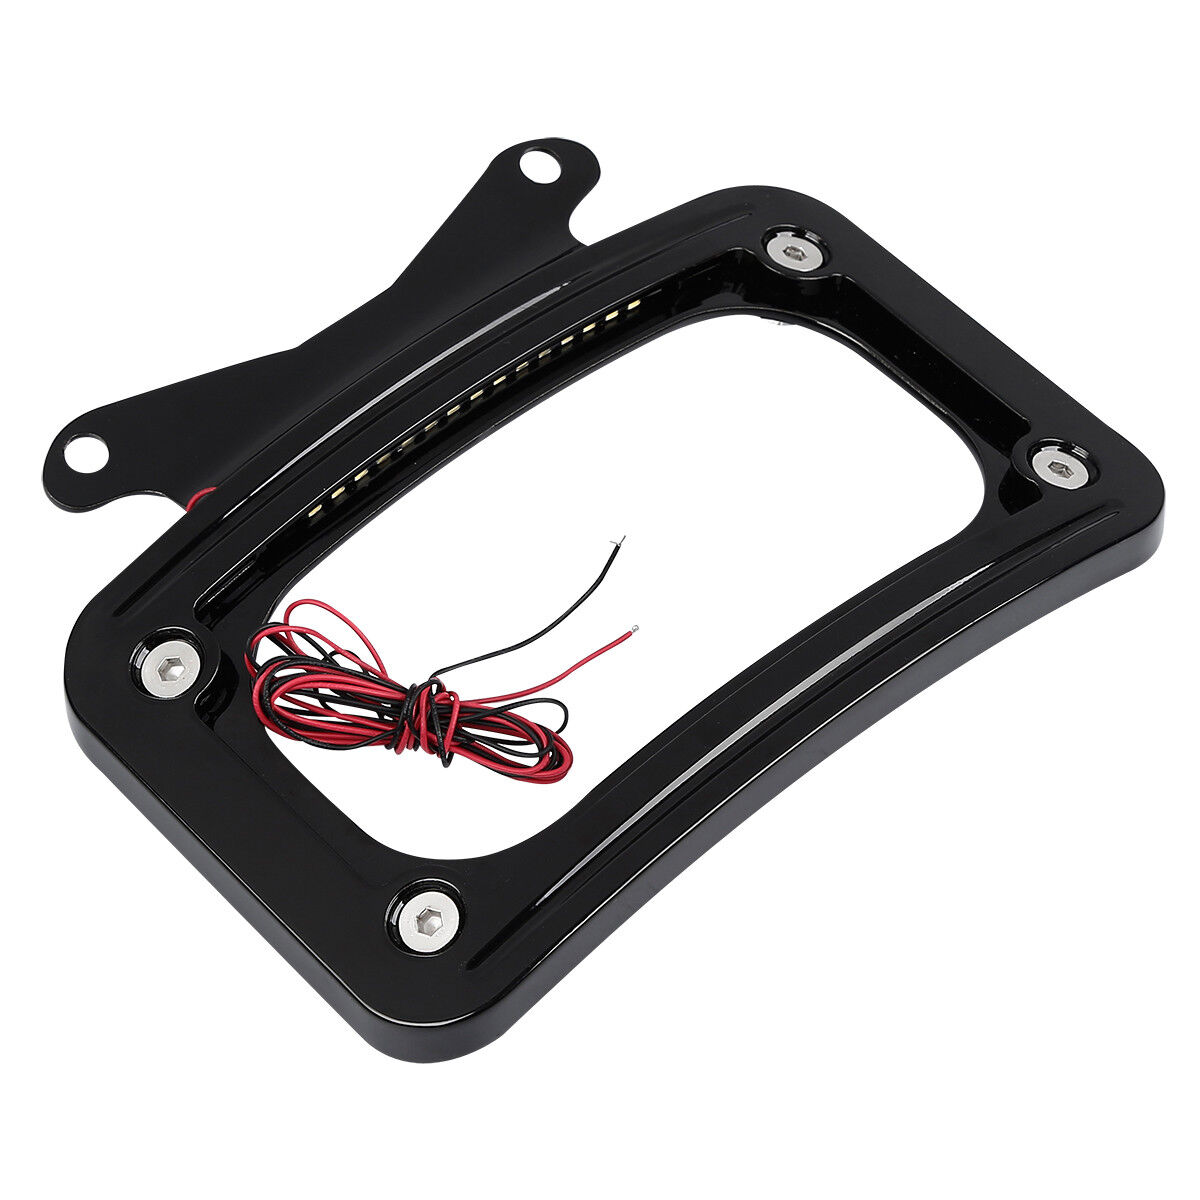 Black/Chrome Curved License Plate Mount W/ Light Fit For Harley Street Glide